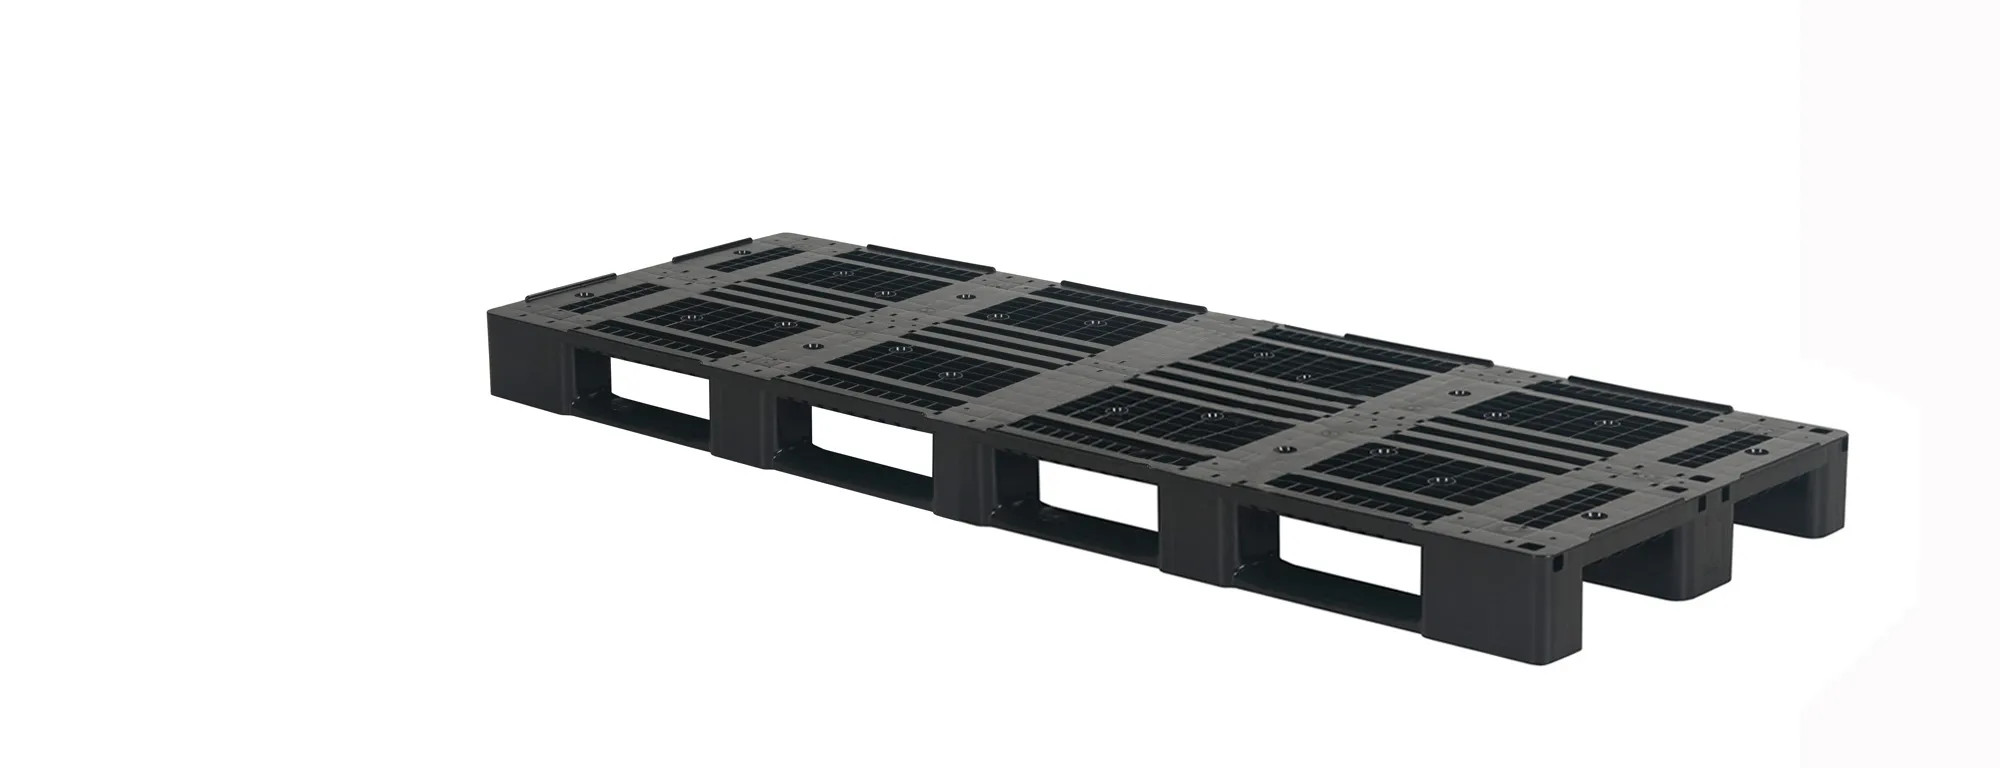 Plastic pallet - D1-TRIO ECO - 3000 x 800 mm (with rims - 3 runners)